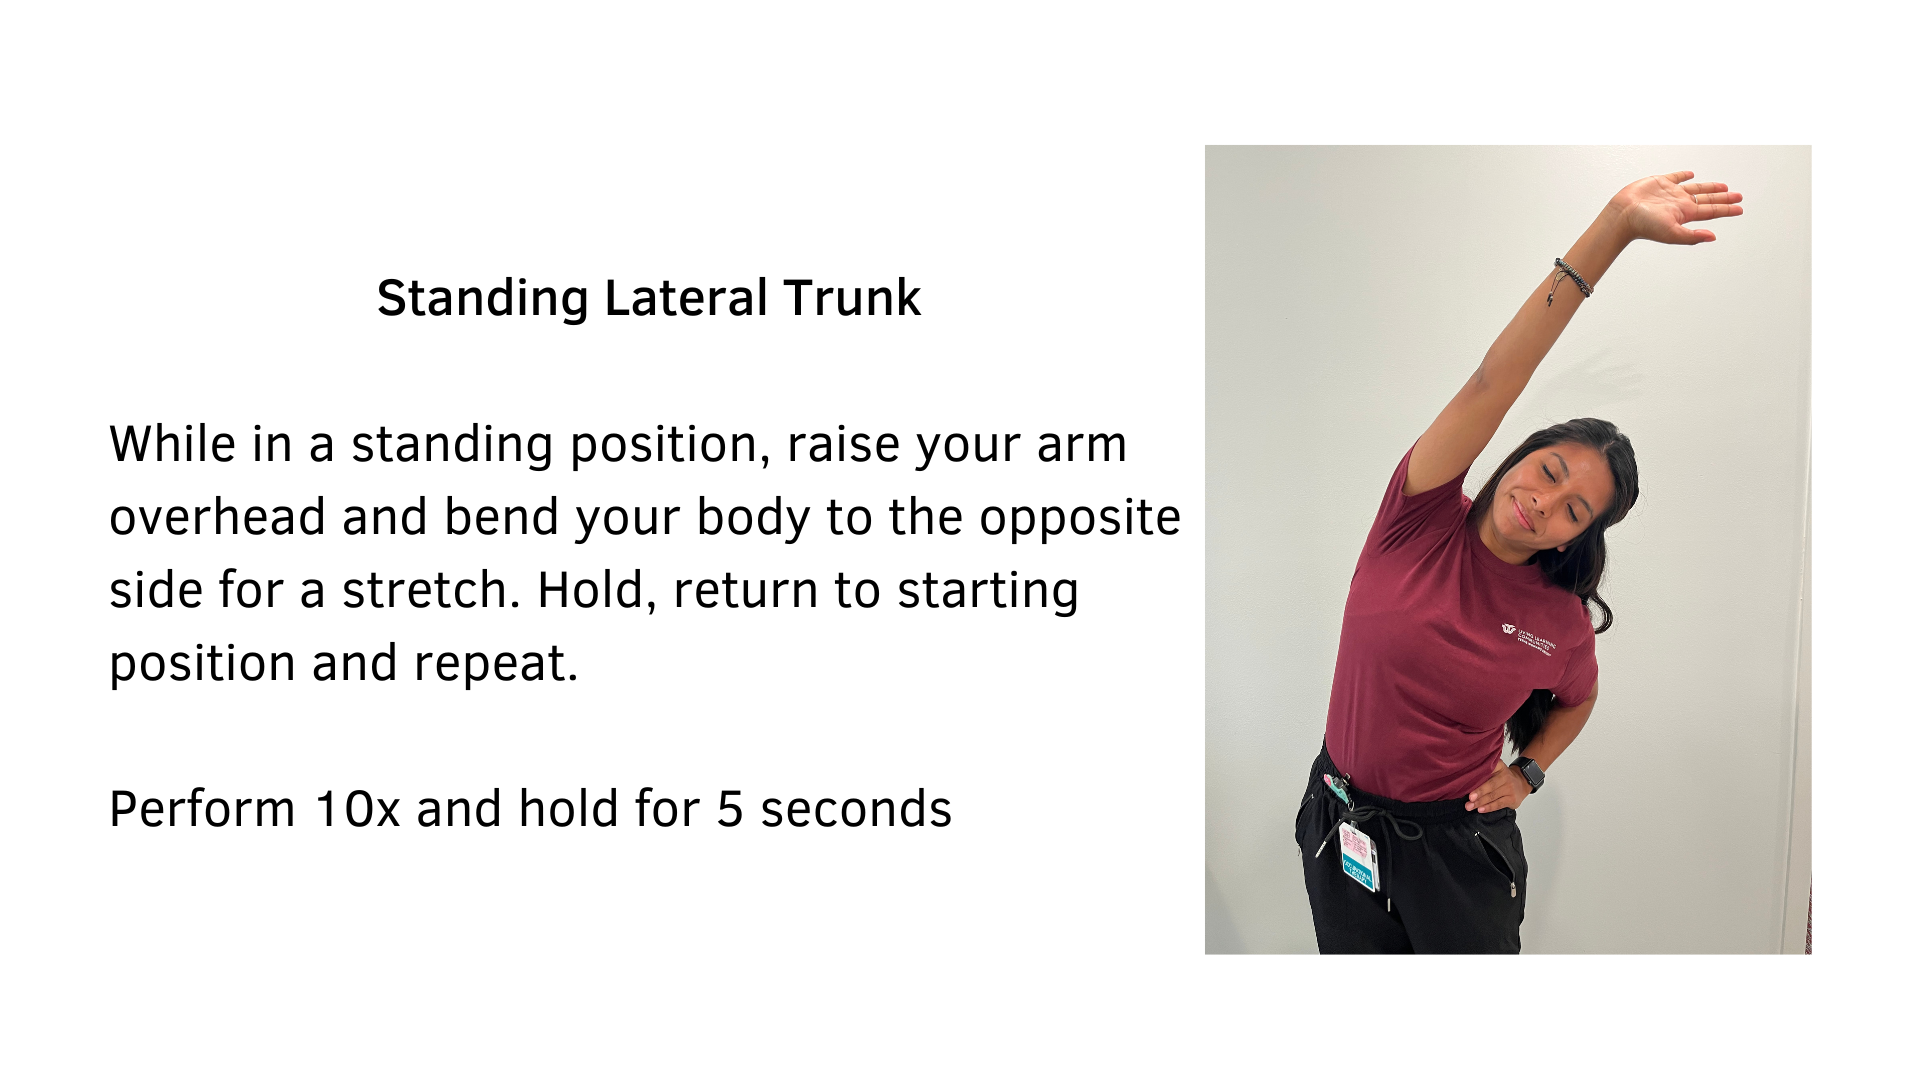 Black text on a white background that reads, "Standing Lateral Trunk: While in a standing position, raise your arm overhead and bend your body to the opposite side for a stretch. Hold, return to starting position and repeat. Perform 10x and hold for 5 seconds". Pictured is a woman performing the stretch.